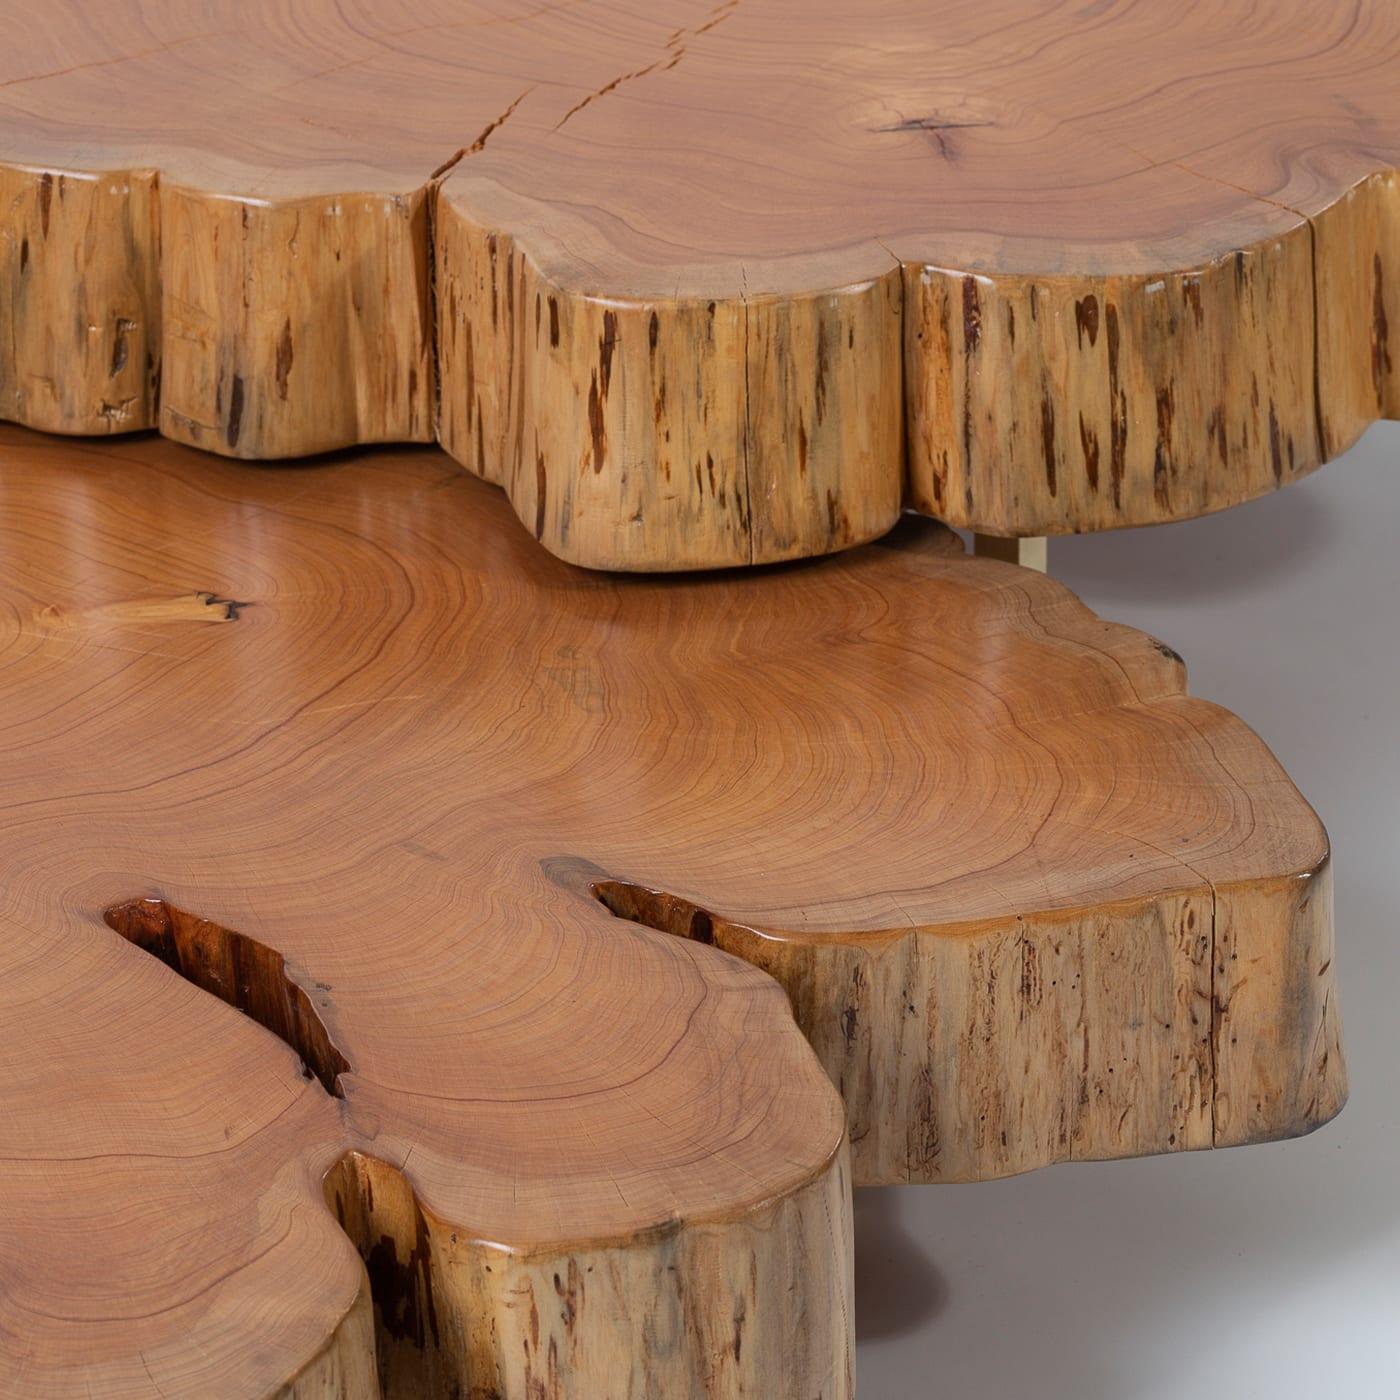 Master artisans at Omnibus Design manage to effortlessly emphasize the natural beauty of organic elements, as the prized, century-old cypress stump used to craft the tabletops of this set of coffee tables. Featuring sinuous profiles recalling flower